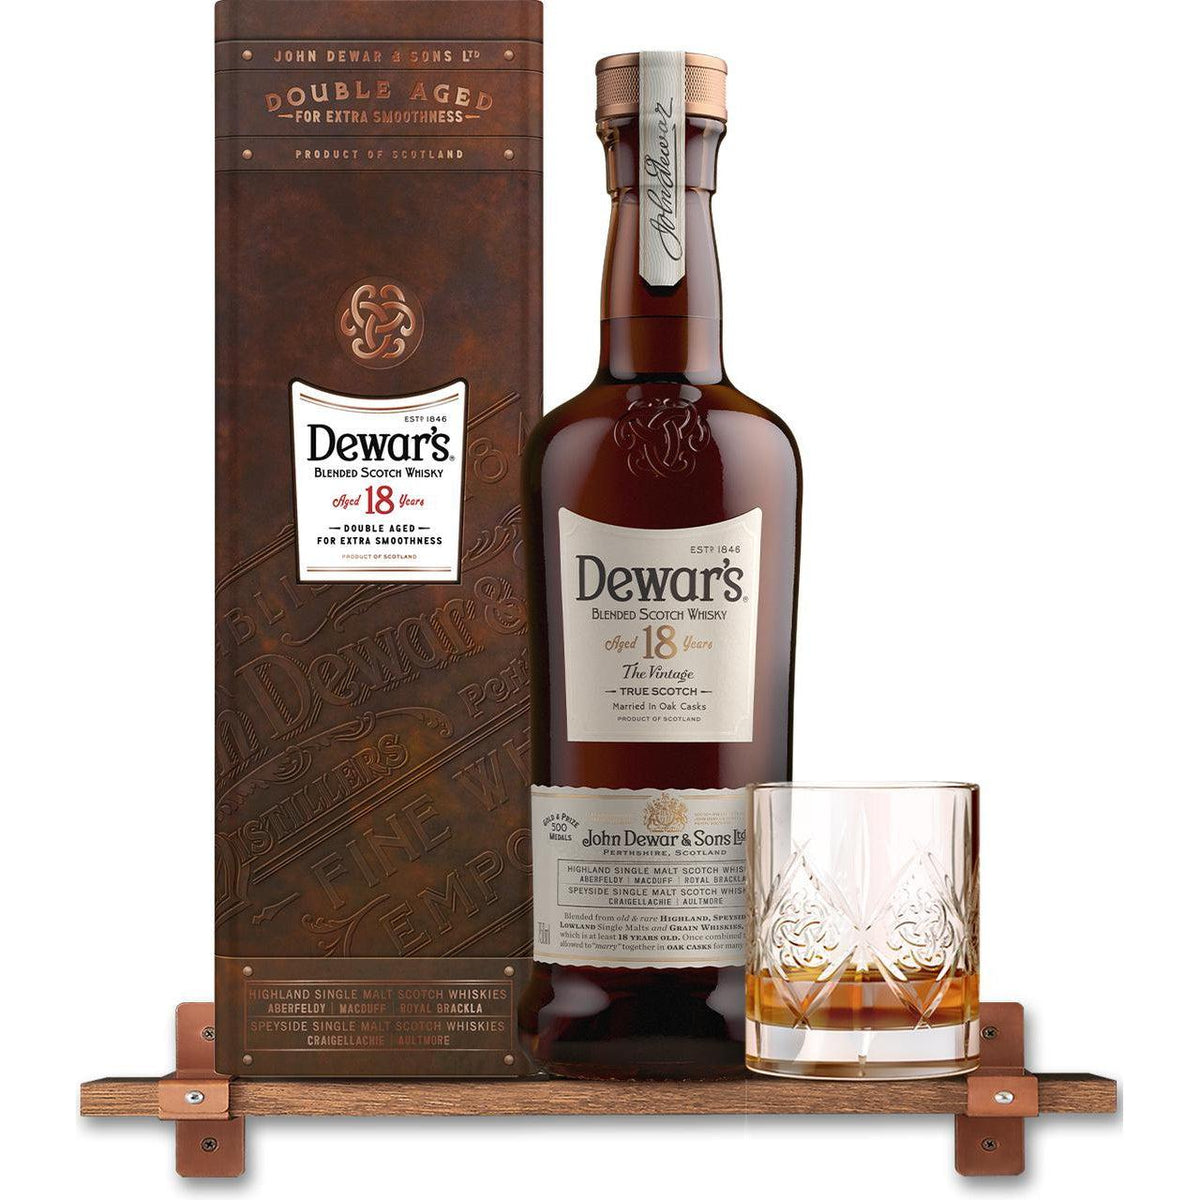 Dewars Blended Scotch Whisky Aged 18 Years Double Aged for Extra Smoothness